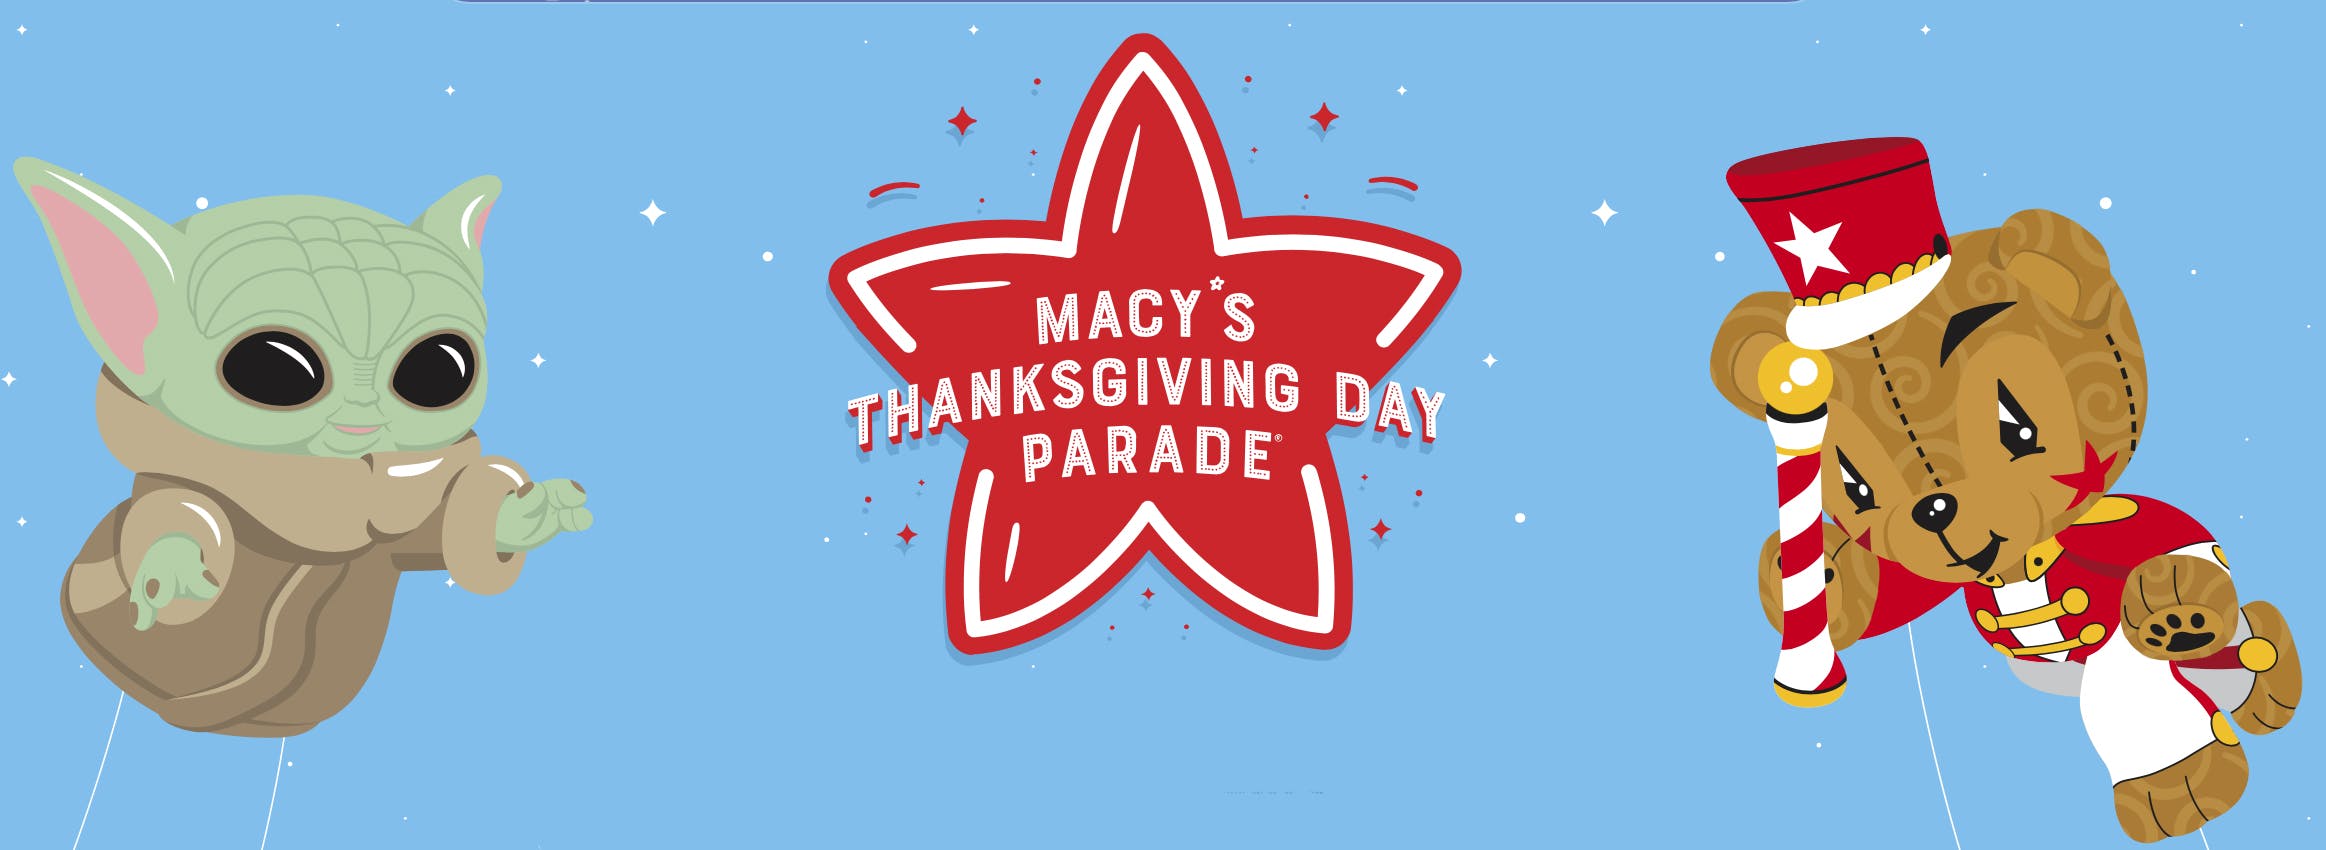 A banner for he Macy's Thanksgiving Day Parade which airs on Sling TV in November 2021.